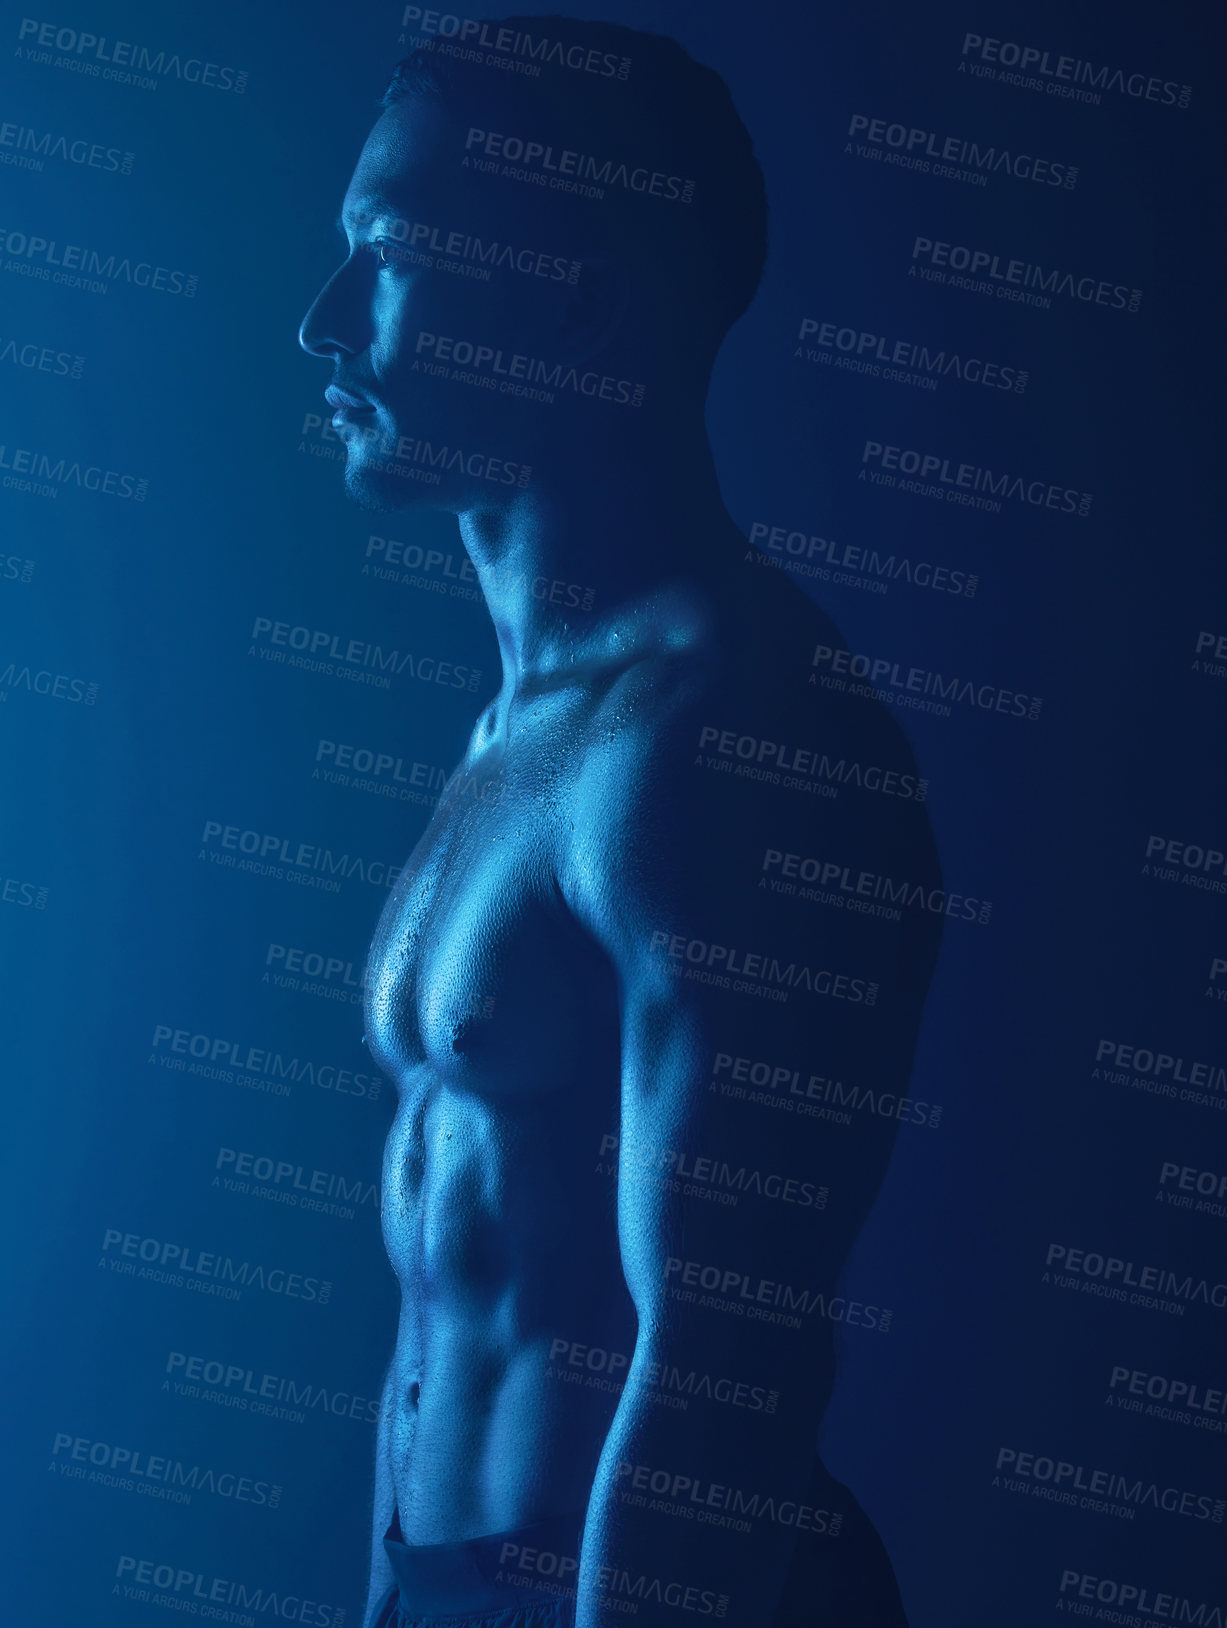 Buy stock photo Studio shot of a fit young man posing against a dark background